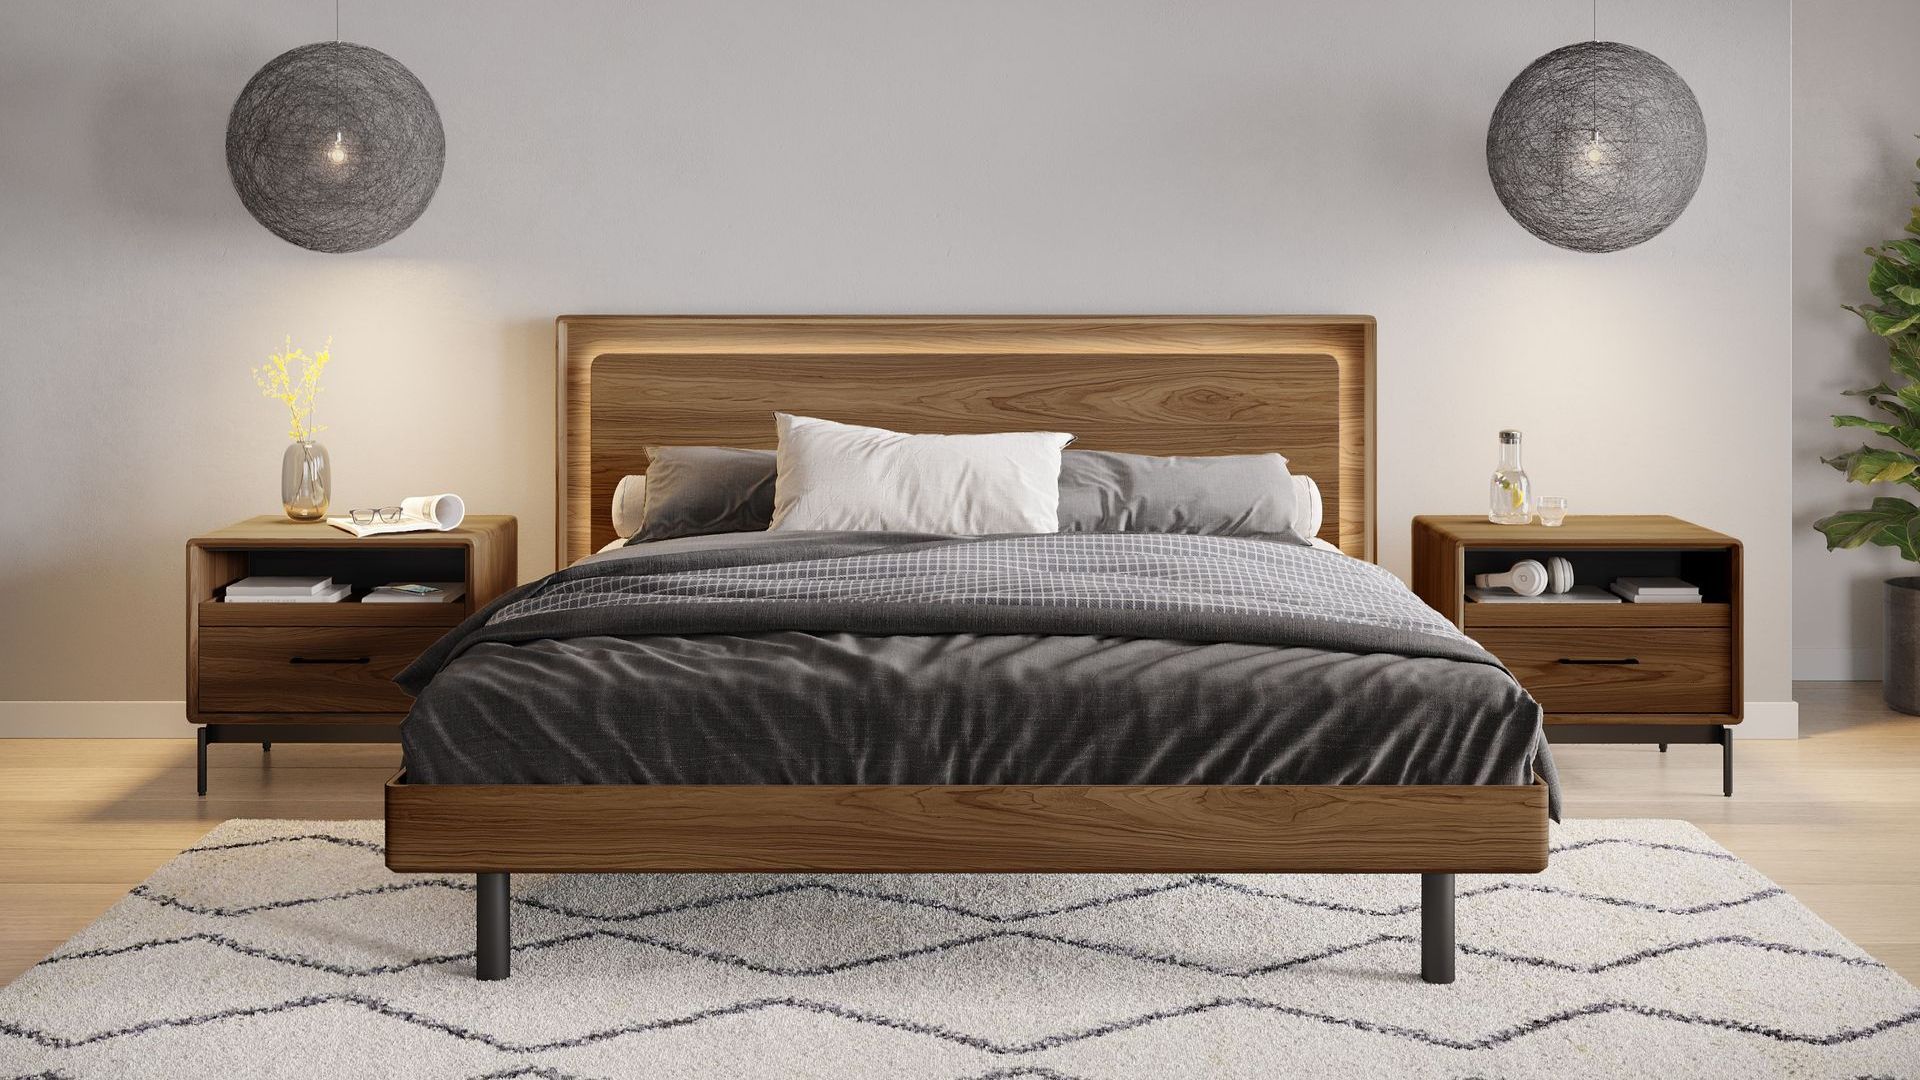 Up-LINQ 9119 Modern King and 9117 Queen Bed With Charging Stations | BDI Furniture